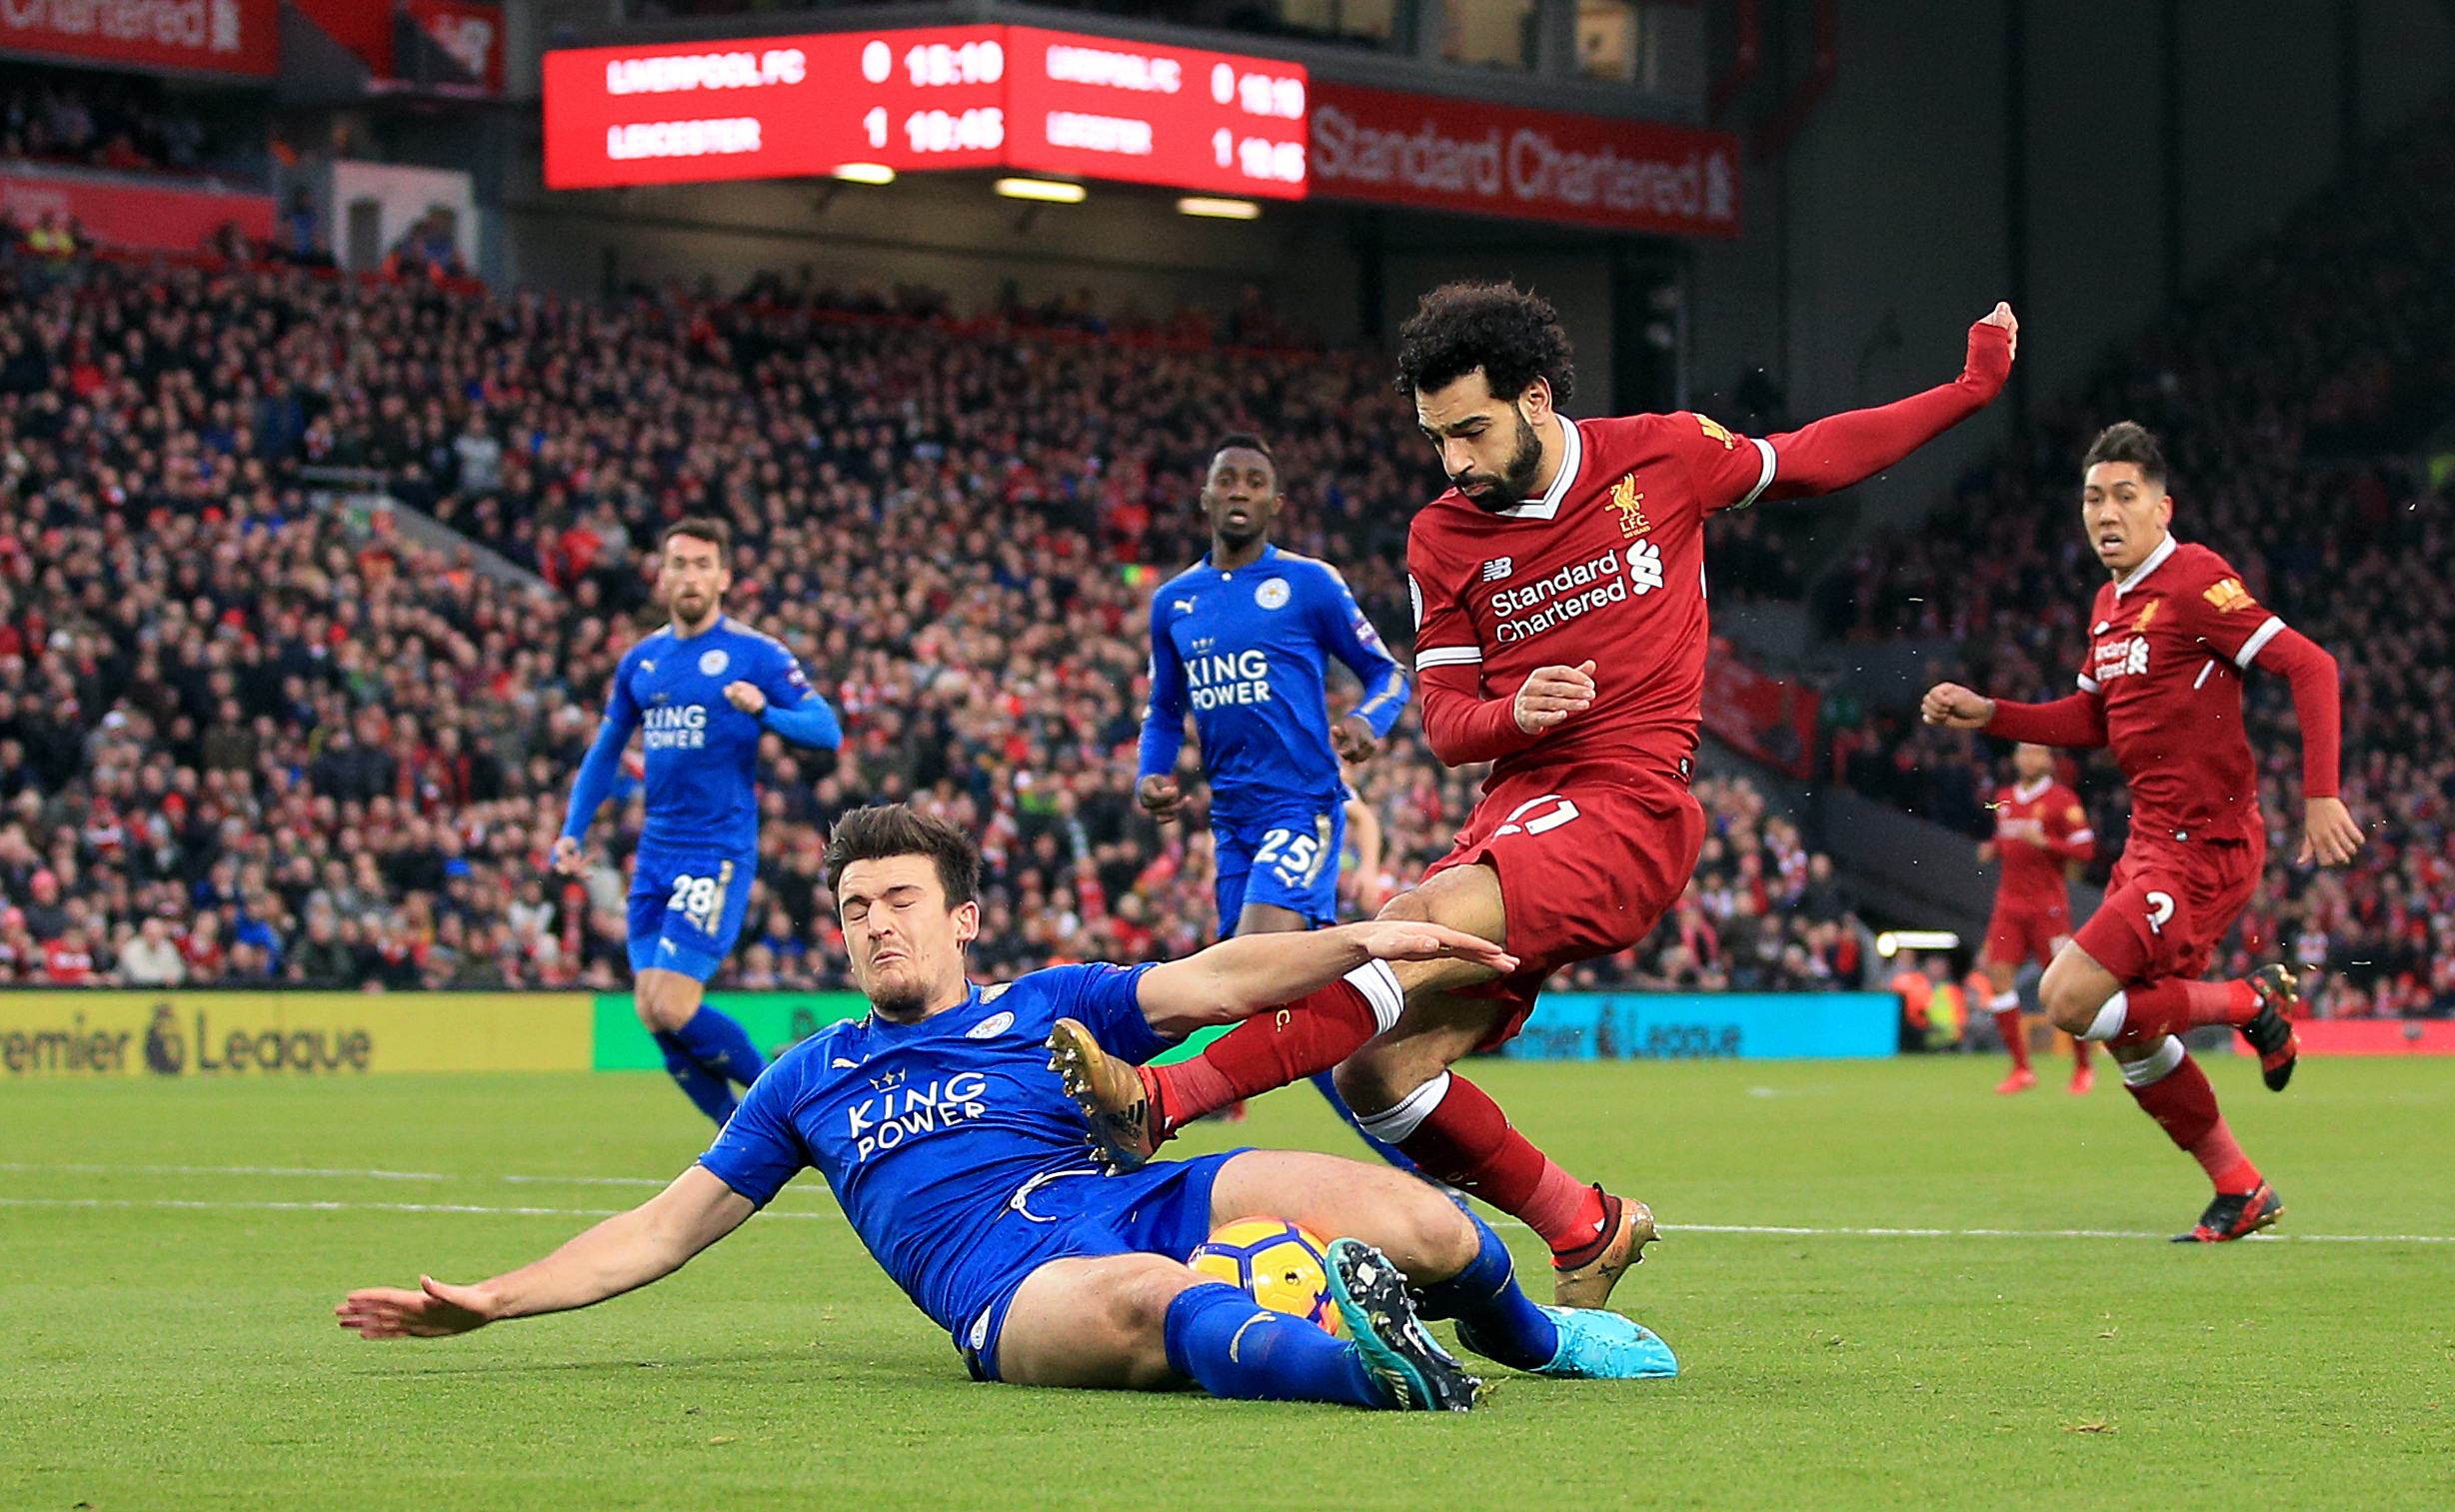 Leicester City's Harry Maguire and Liverpool's Mohamed Salah